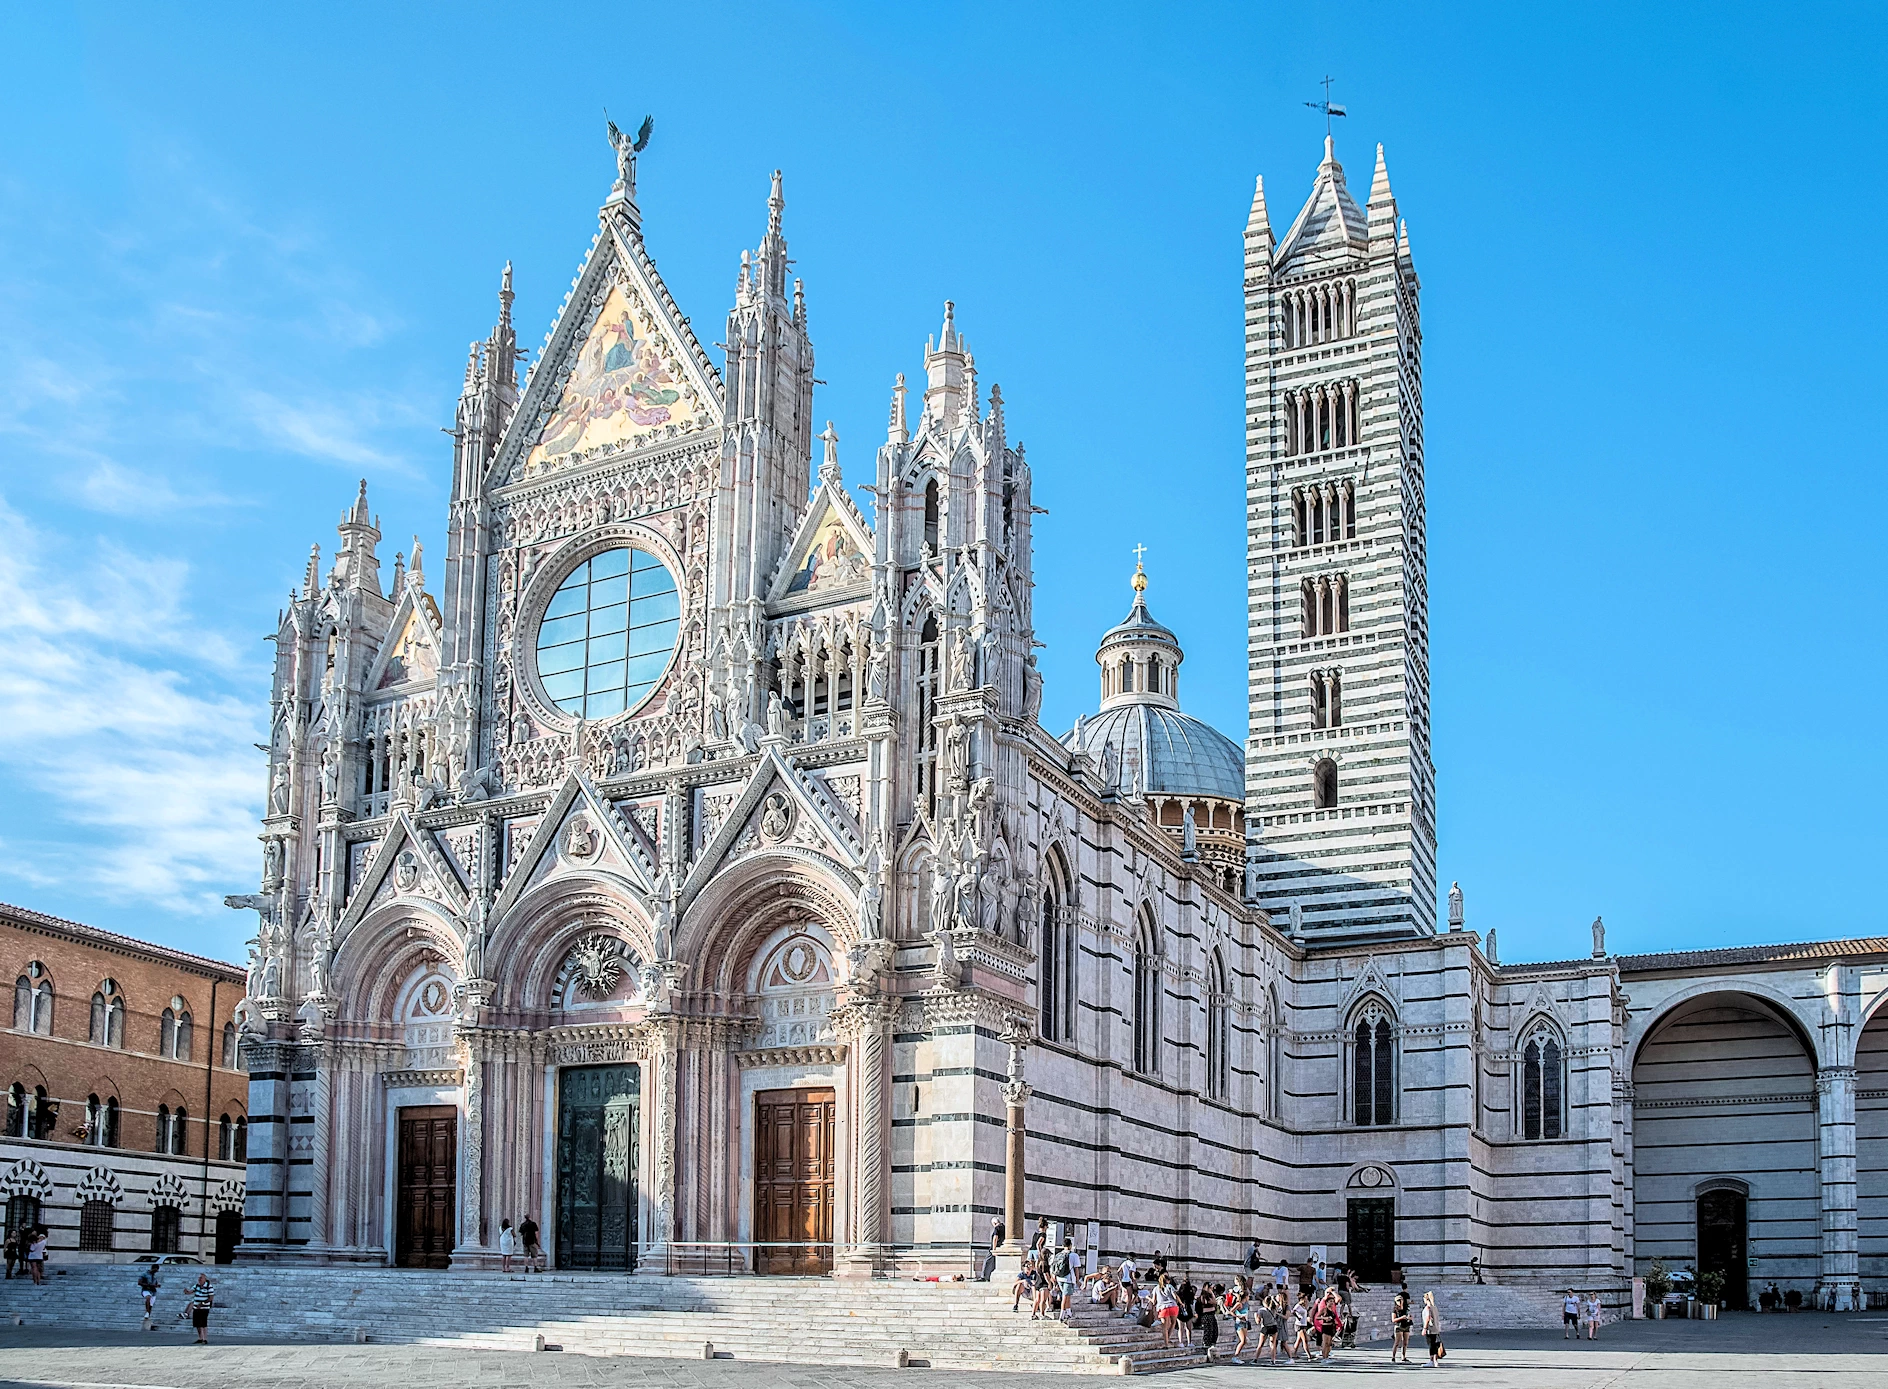 Explore Siena, Italy's enchanting medieval hill town. Witness the breathtaking Piazza del Campo, climb the Torre del Mangia for panoramic views, and marvel at the Duomo's artistic treasures.  Indulge in delicious Tuscan cuisine and discover the city's rich history and Palio horse racing tradition.